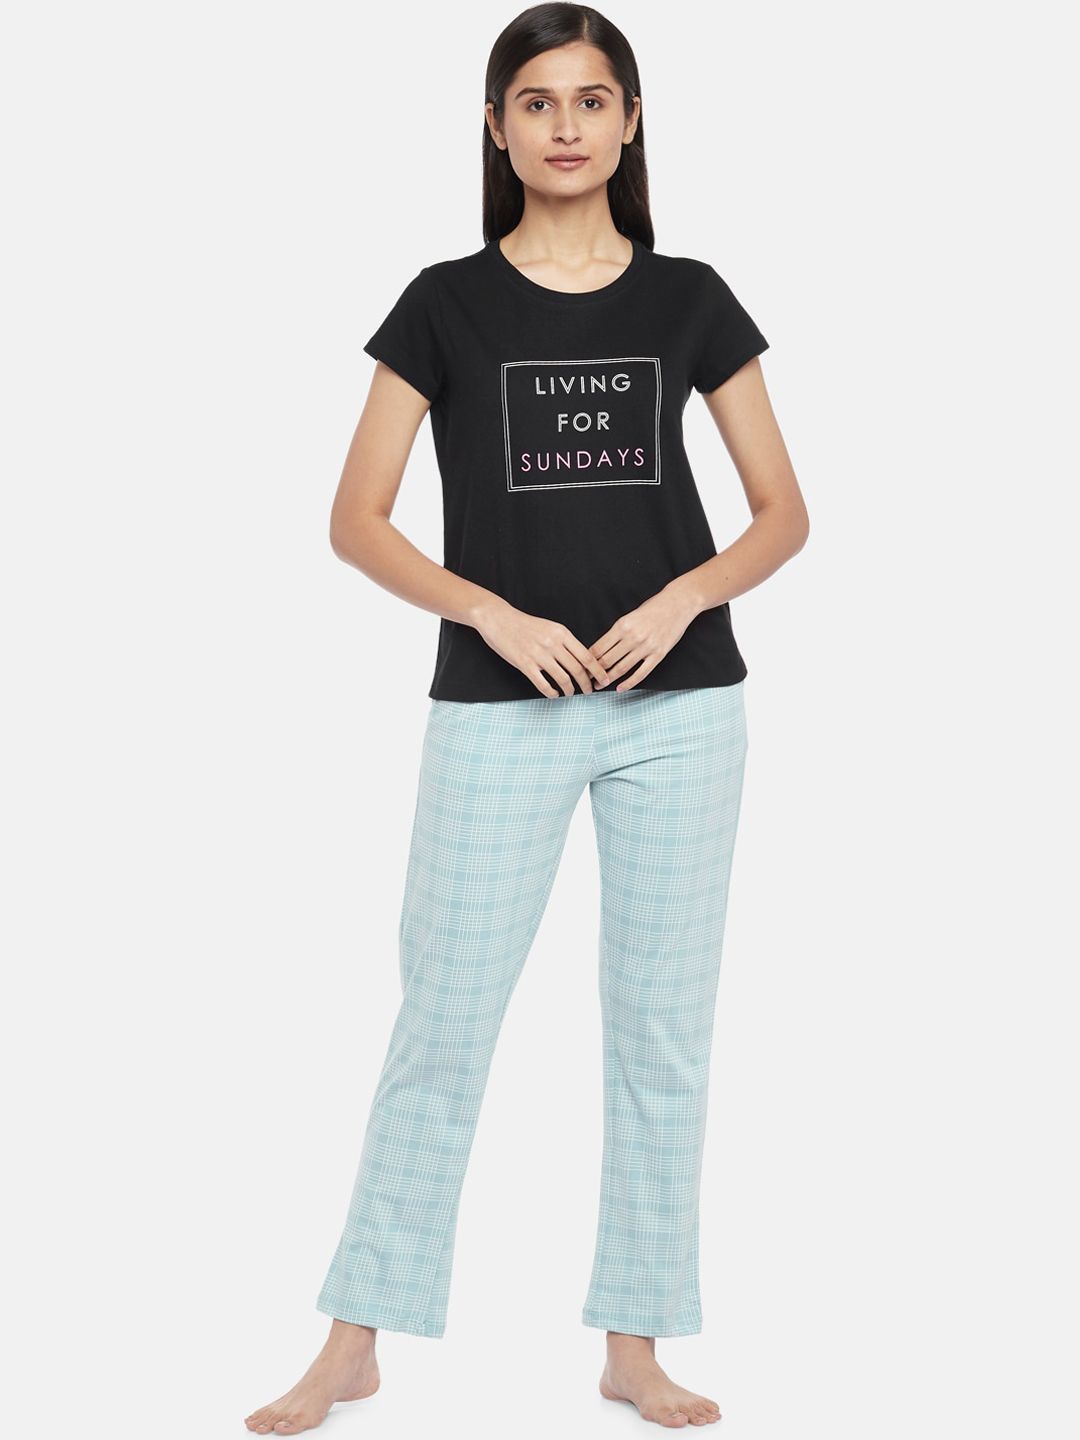 Dreamz by Pantaloons Women Black & Blue Printed Pure Cotton Night suit Price in India